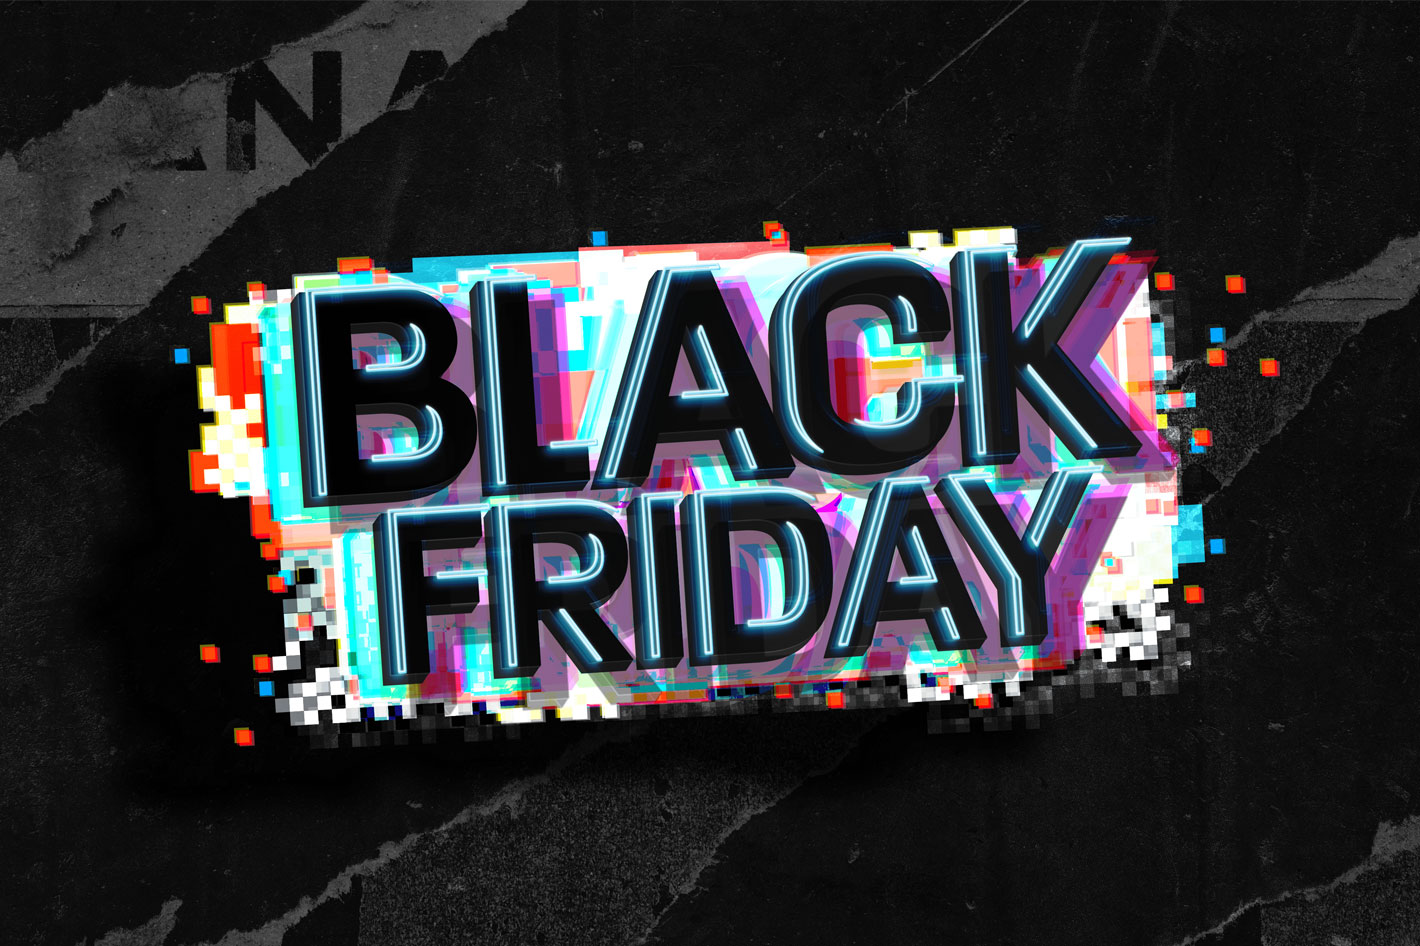 Affinity’s Black Friday offers 30% off everything